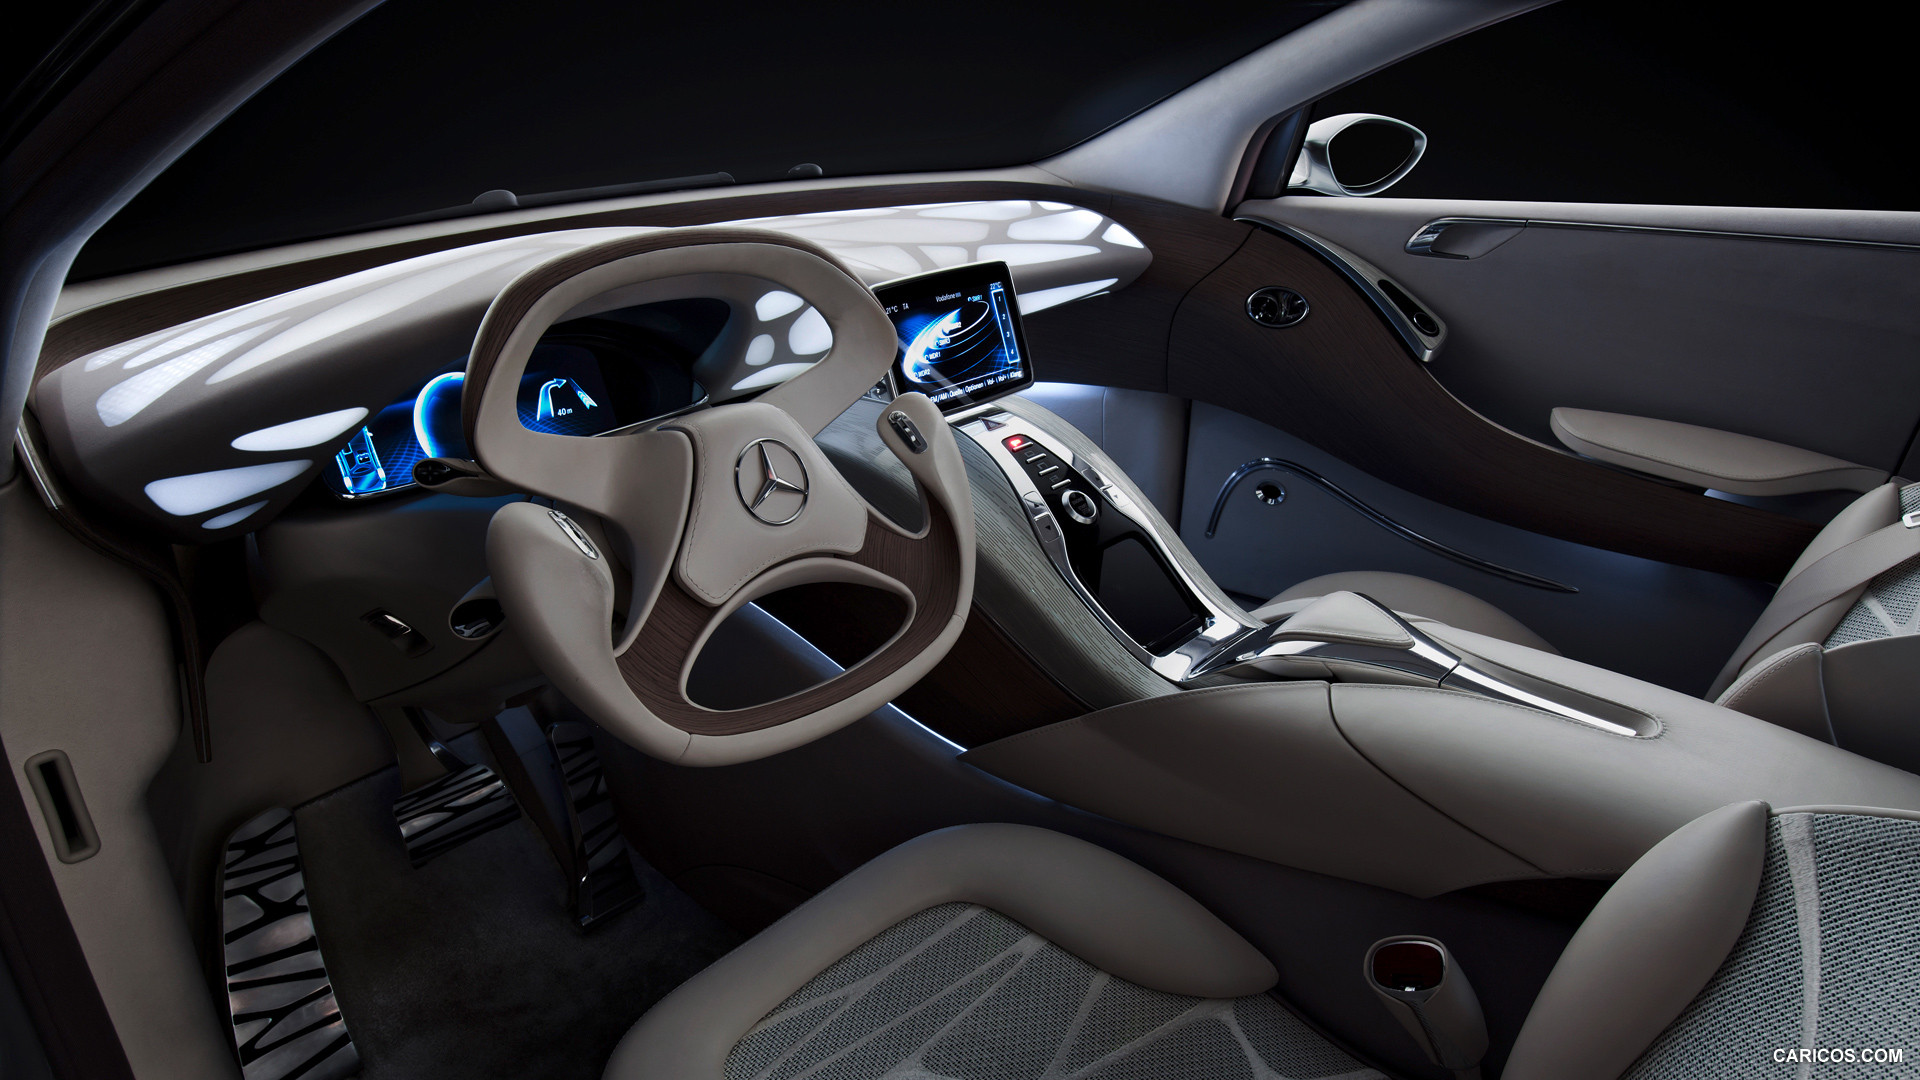 Mercedes-Benz F800 Style Concept (2010)  - Interior, Front Seats, #42 of 120